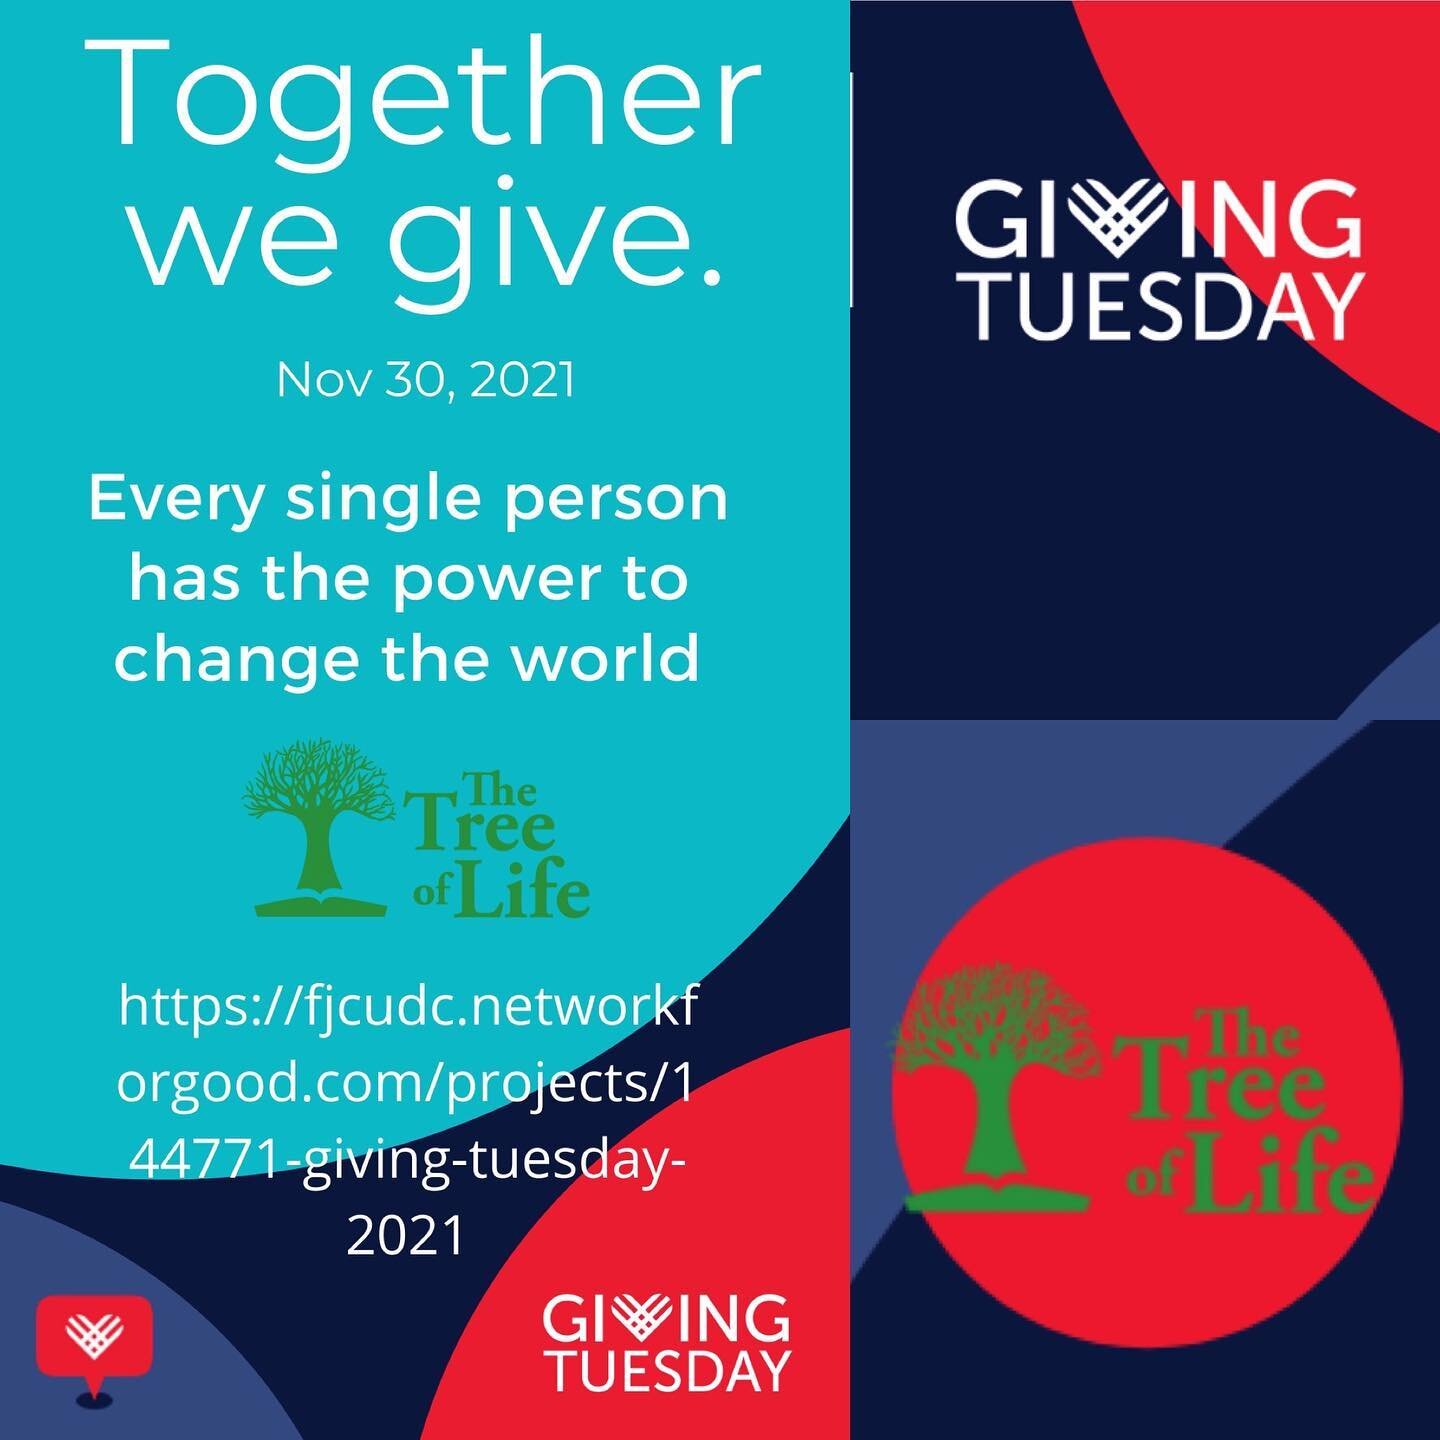 On #GivingTuesday @TreeofLifeFPCJ is hoping you'll become a champion supporting resiliency and self-sufficiency in #Jamaica NY by donating. No gift is too big or too small to change a life. https://fjcudc.networkforgood.com/projects/144771-giving-tue